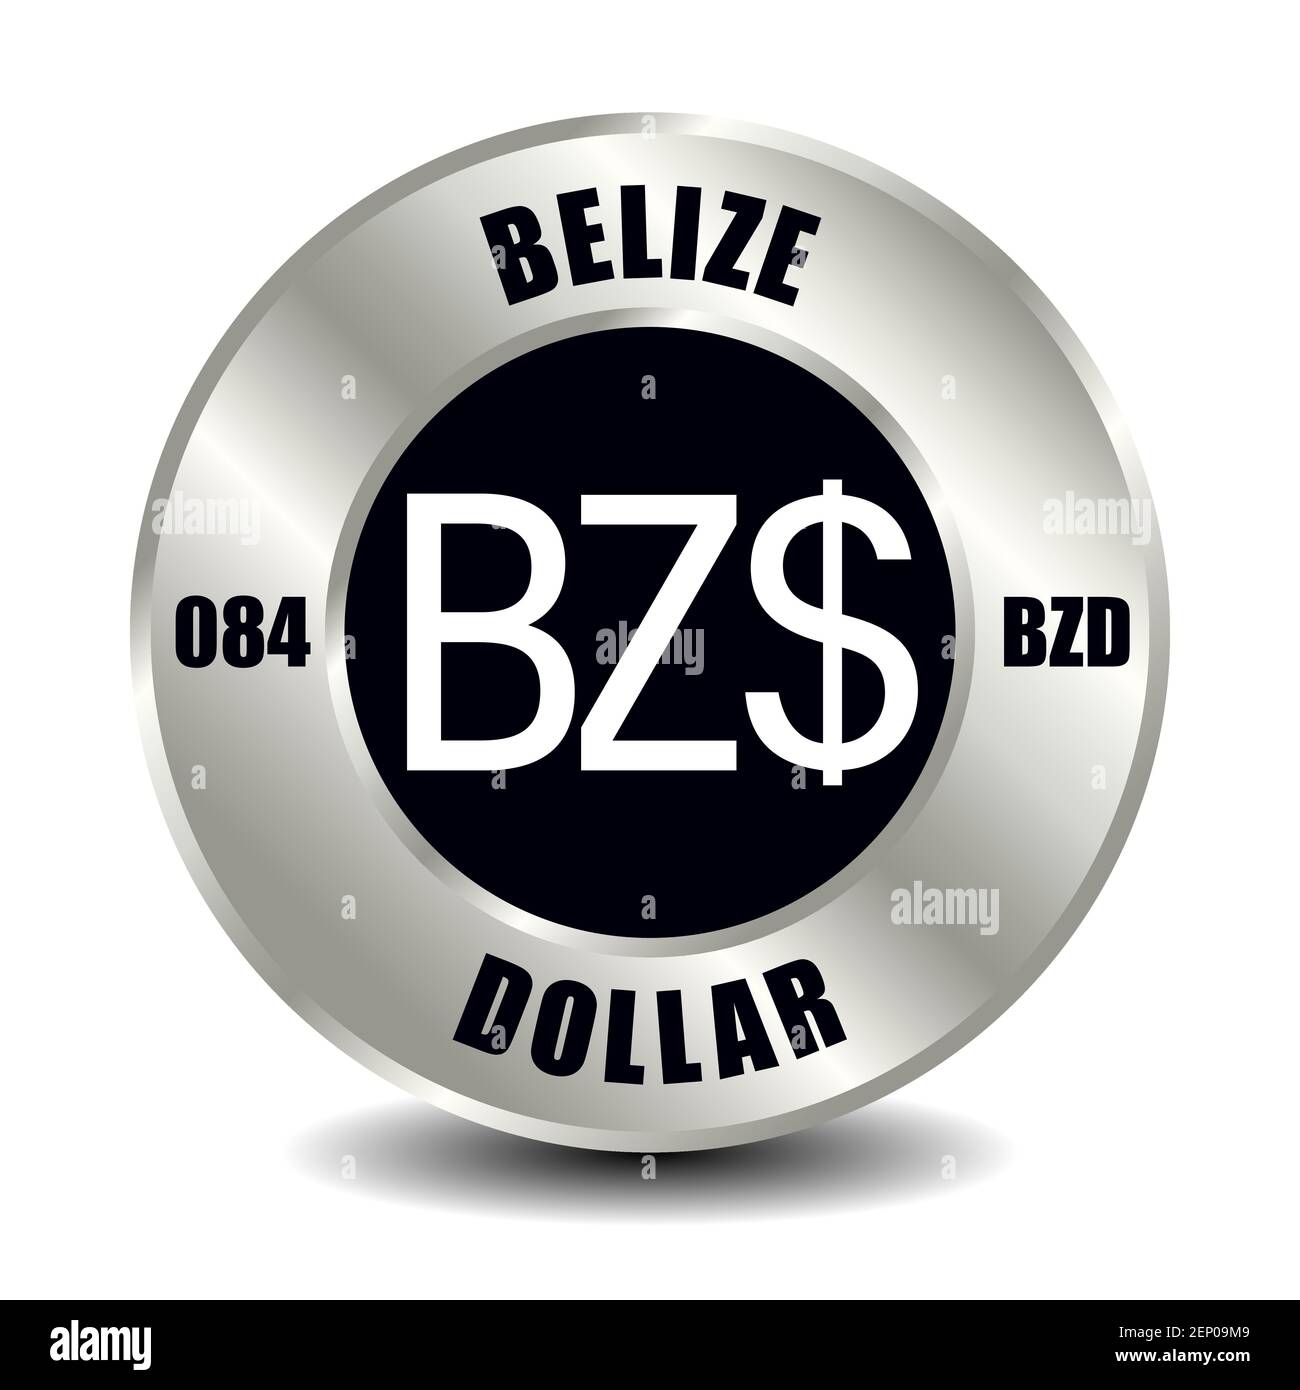 Belize money icon isolated on round silver coin. Vector sign of currency symbol with international ISO code and abbreviation Stock Vector